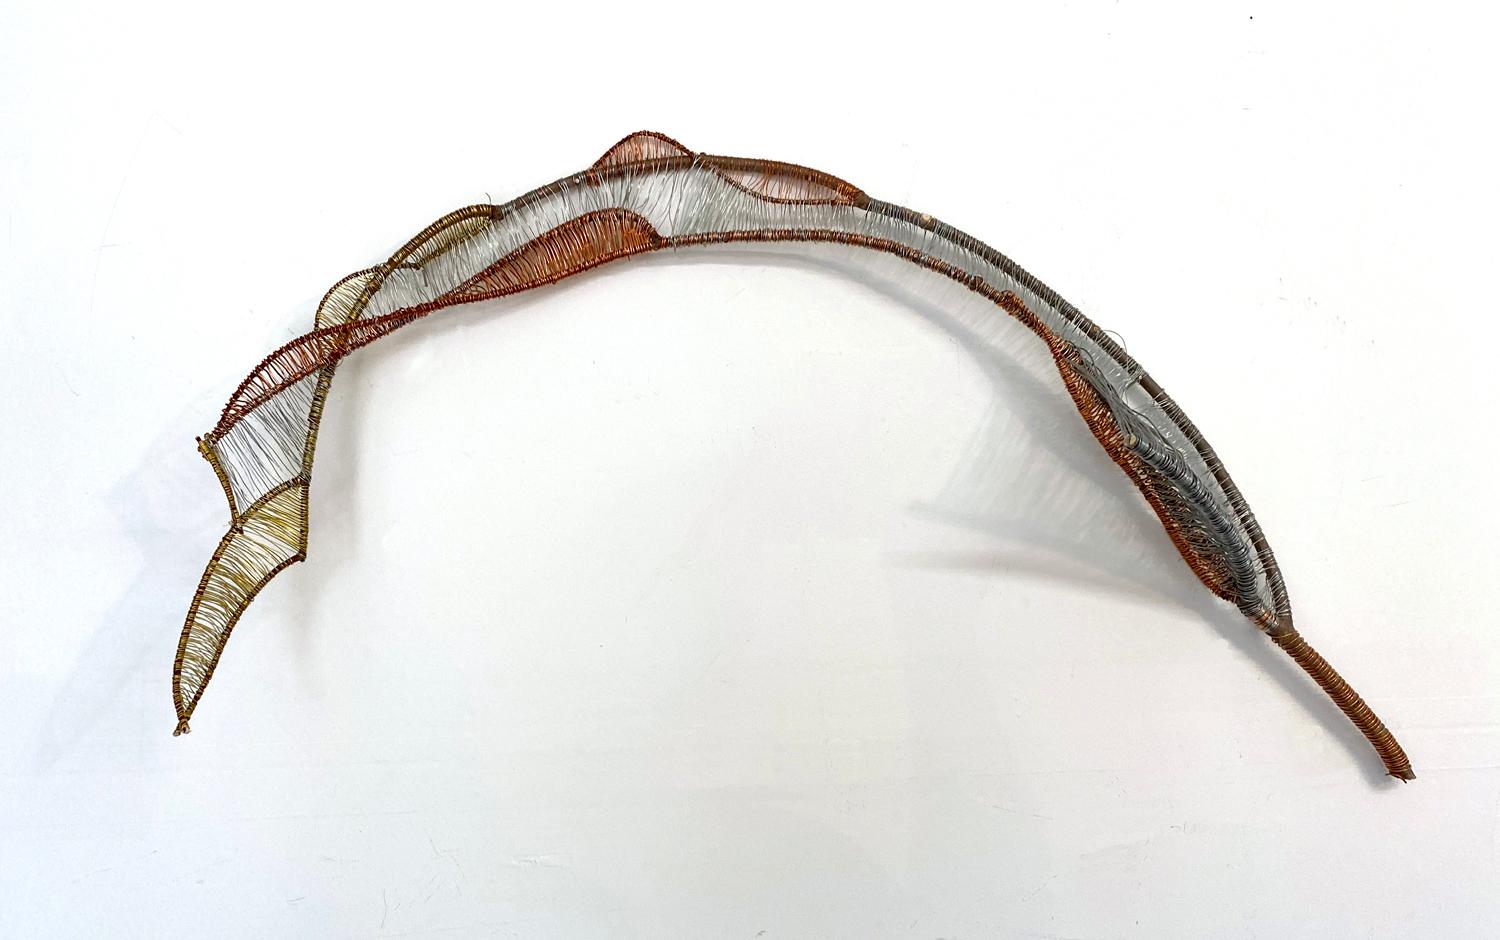 Paige Pedri Abstract Sculpture - Stipule - dramatic curved line sculpture made from branches and wire